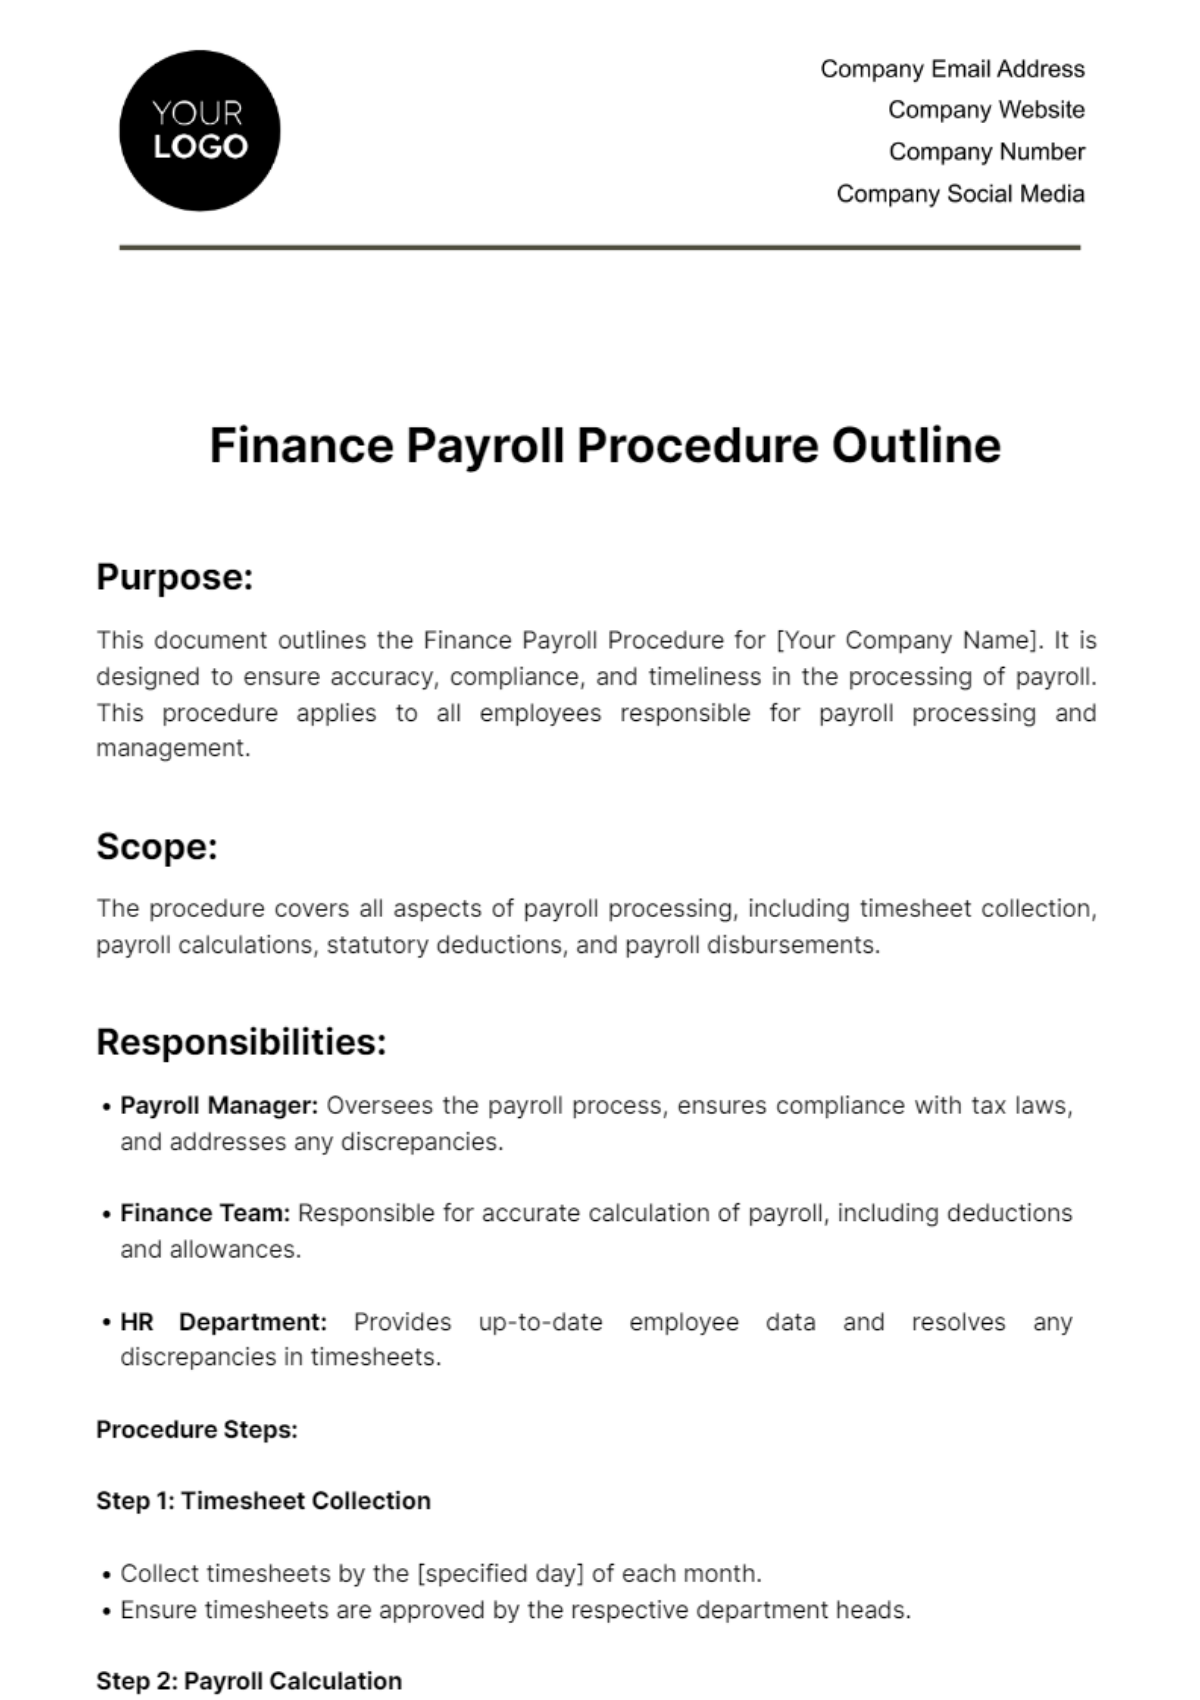 Free Finance Payroll Procedure Outline Template